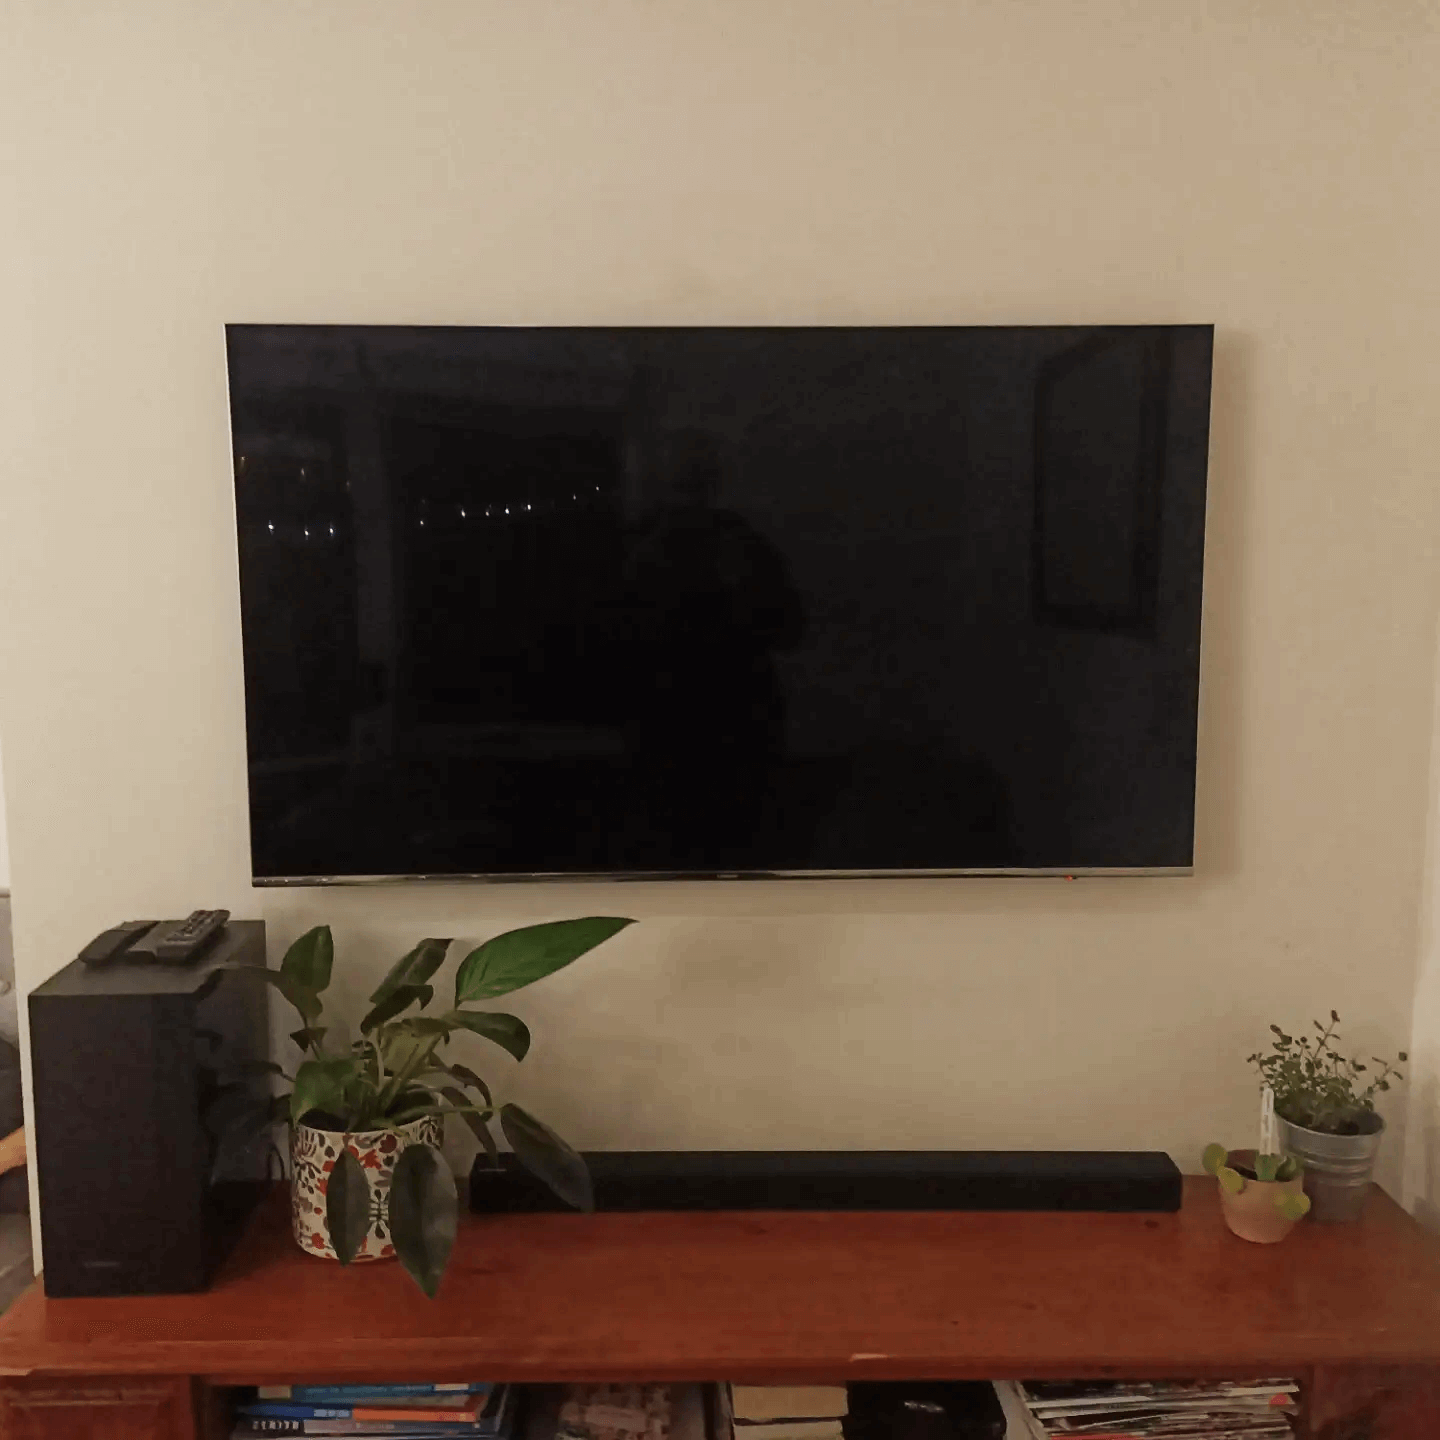 TV Mounting and Cabling